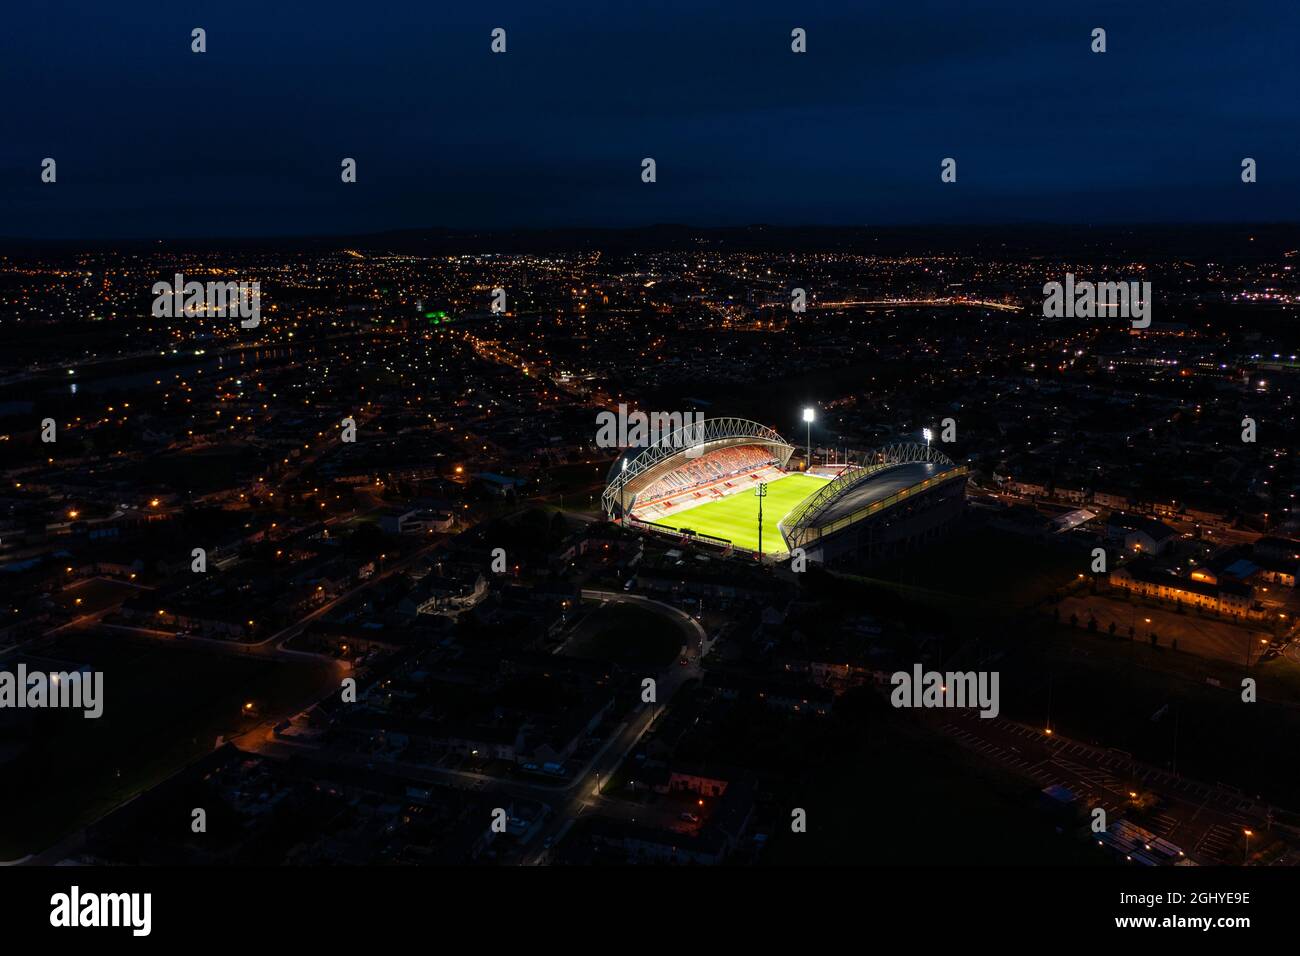 Aerial view of stadium with green grass pitch and focus lights on in Ireland surrounded by residential house in city at night Stock Photo